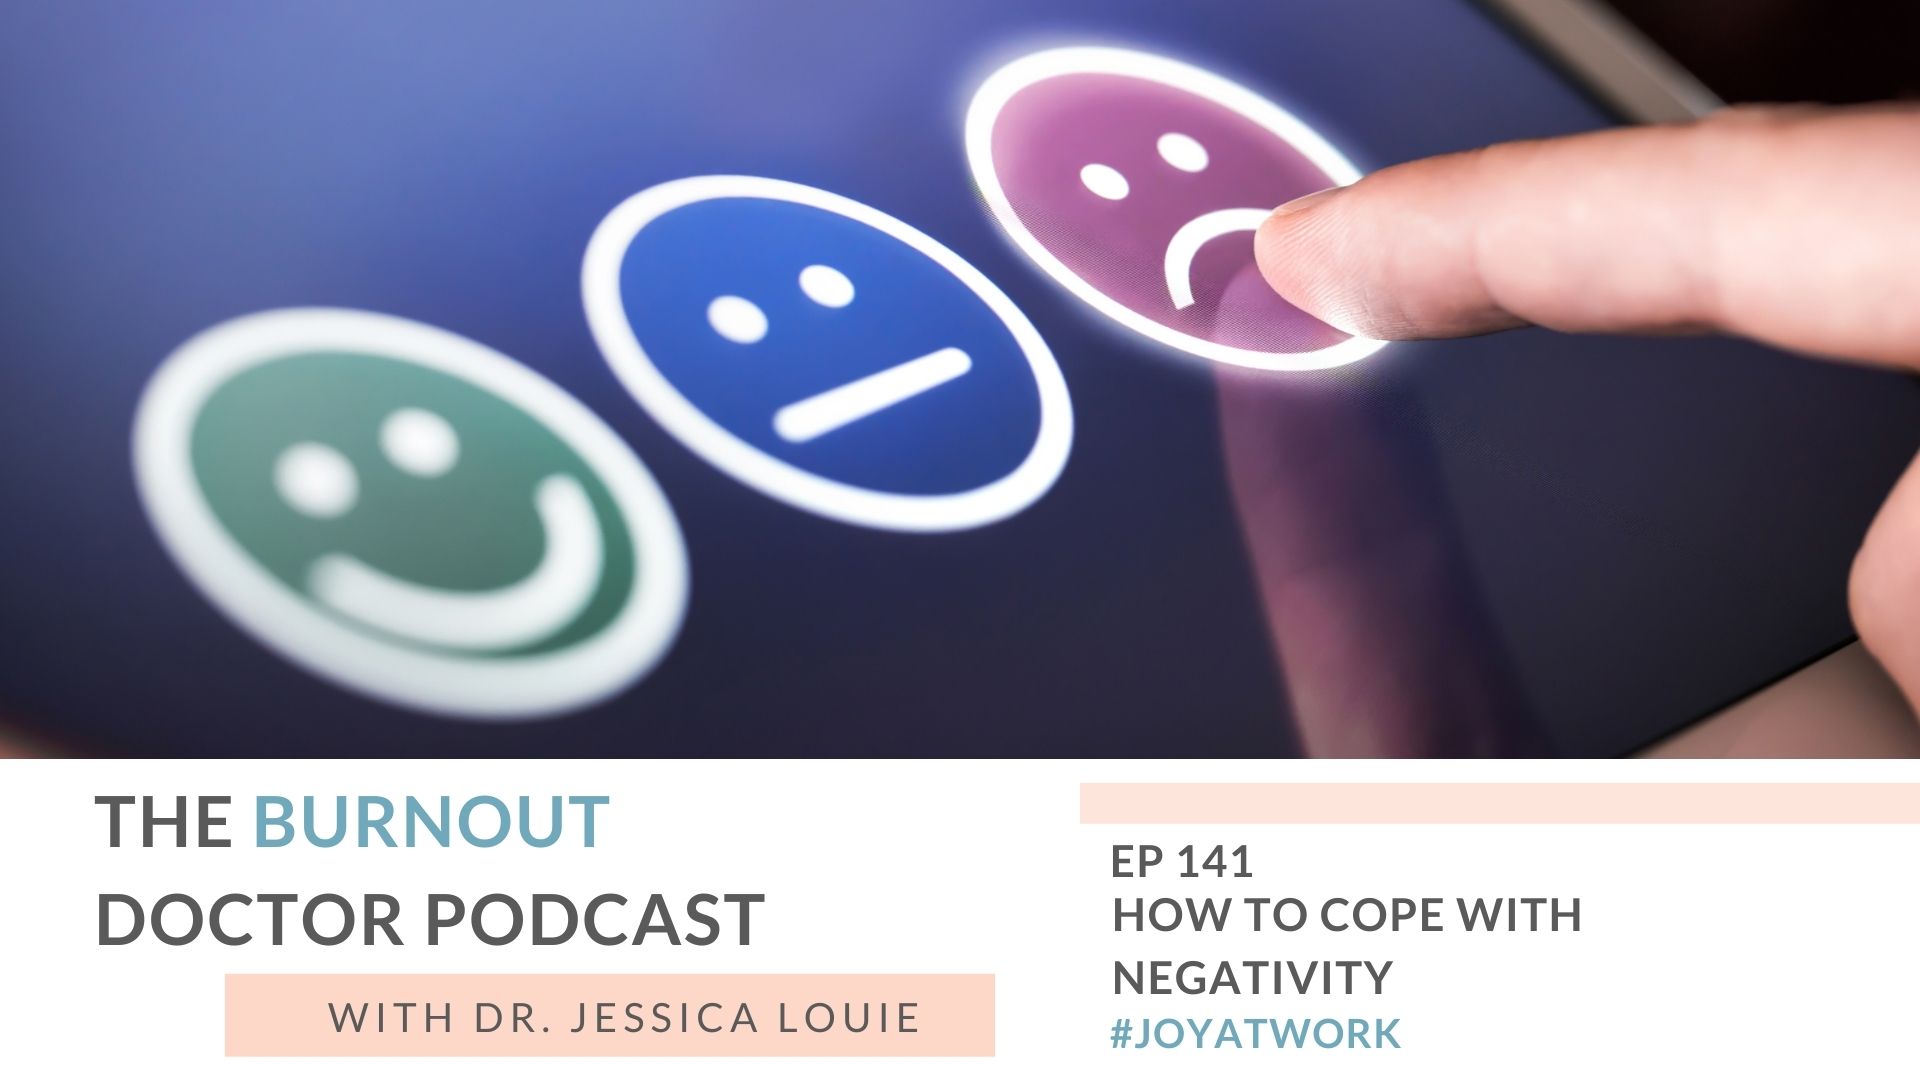 How to cope with negativity. How to cope with negative energy. Negative people. How to deal with failure. The Burnout Doctor Podcast with Dr. Jessica Louie. Keynote speaker.